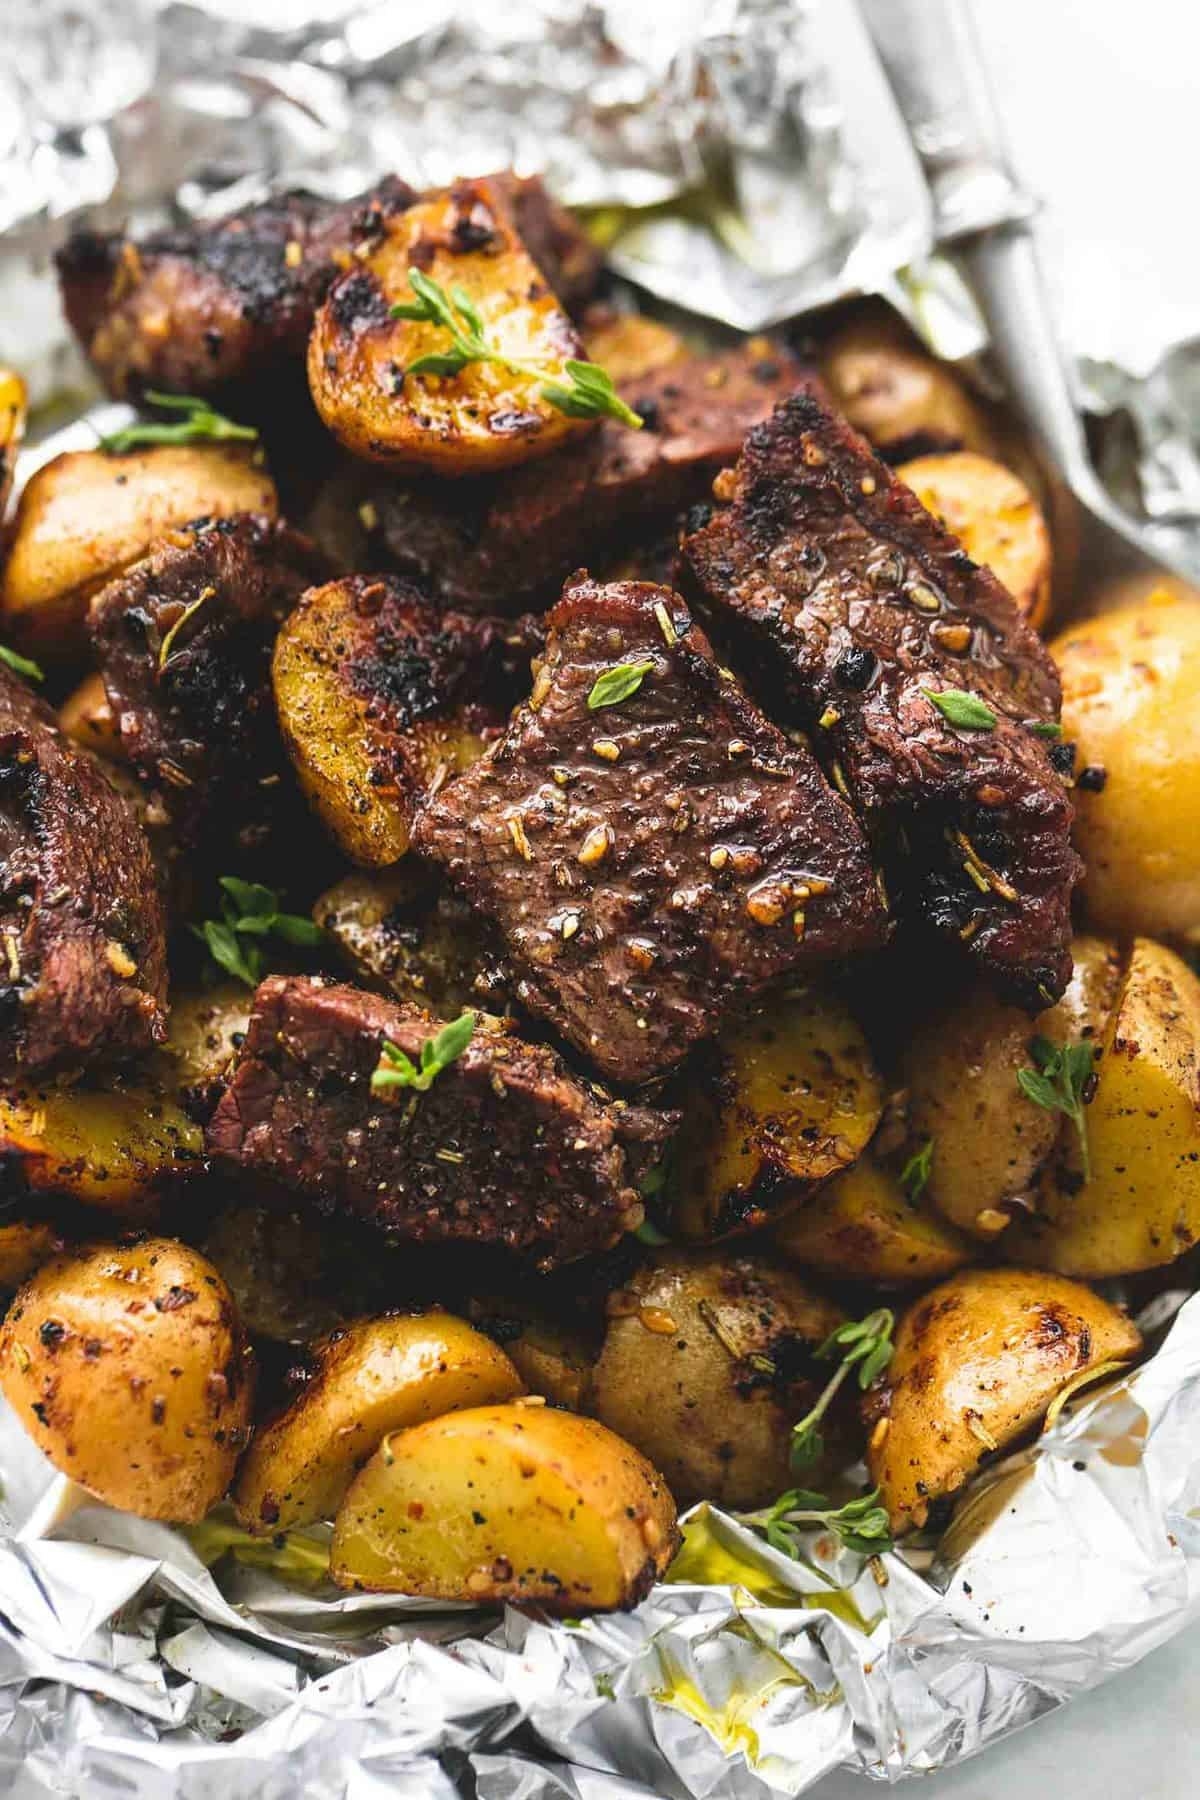 Steak and potatoes in foil.